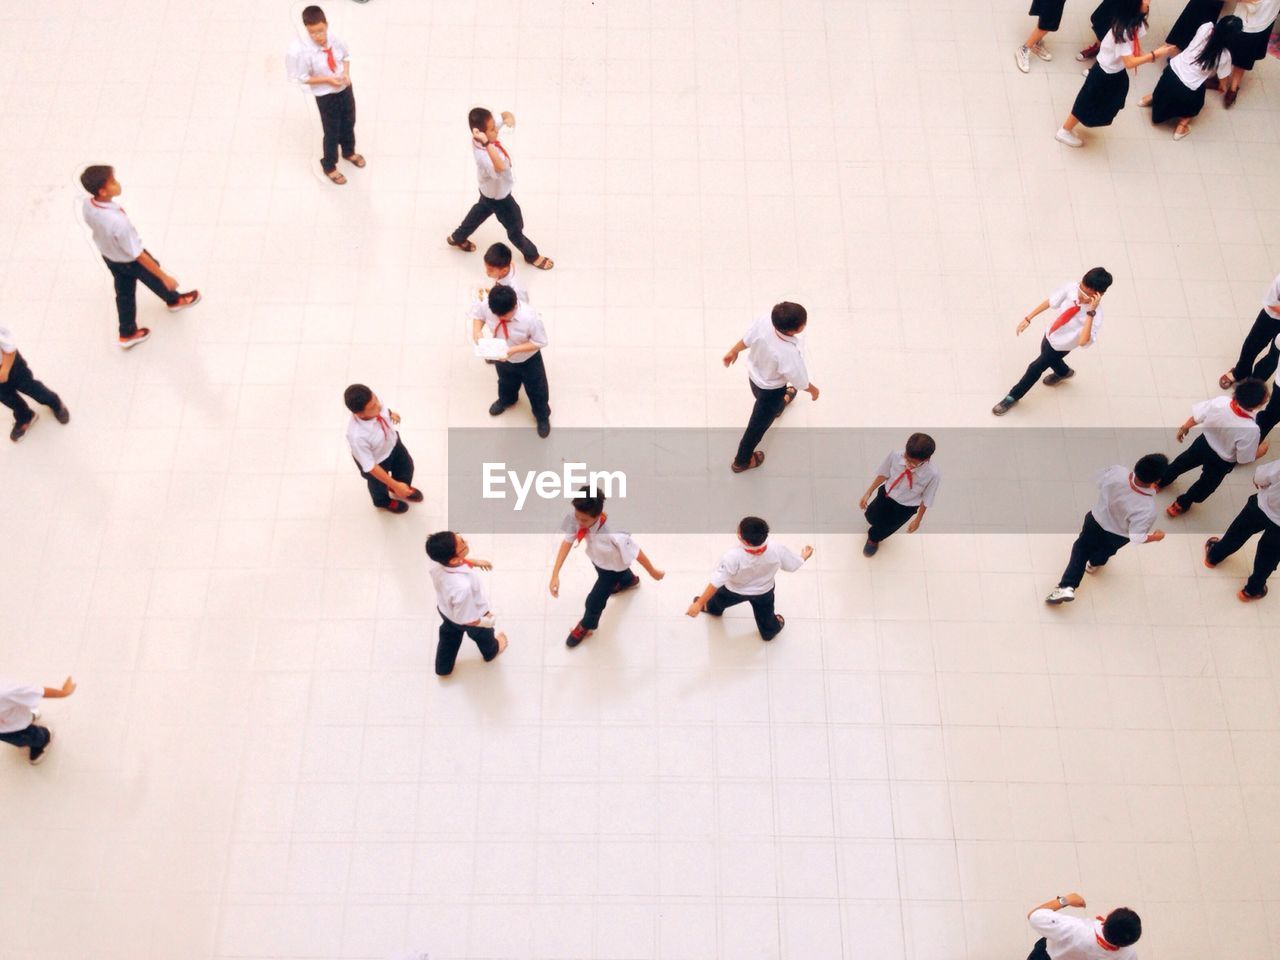 High angle view of students playing on tiled floor